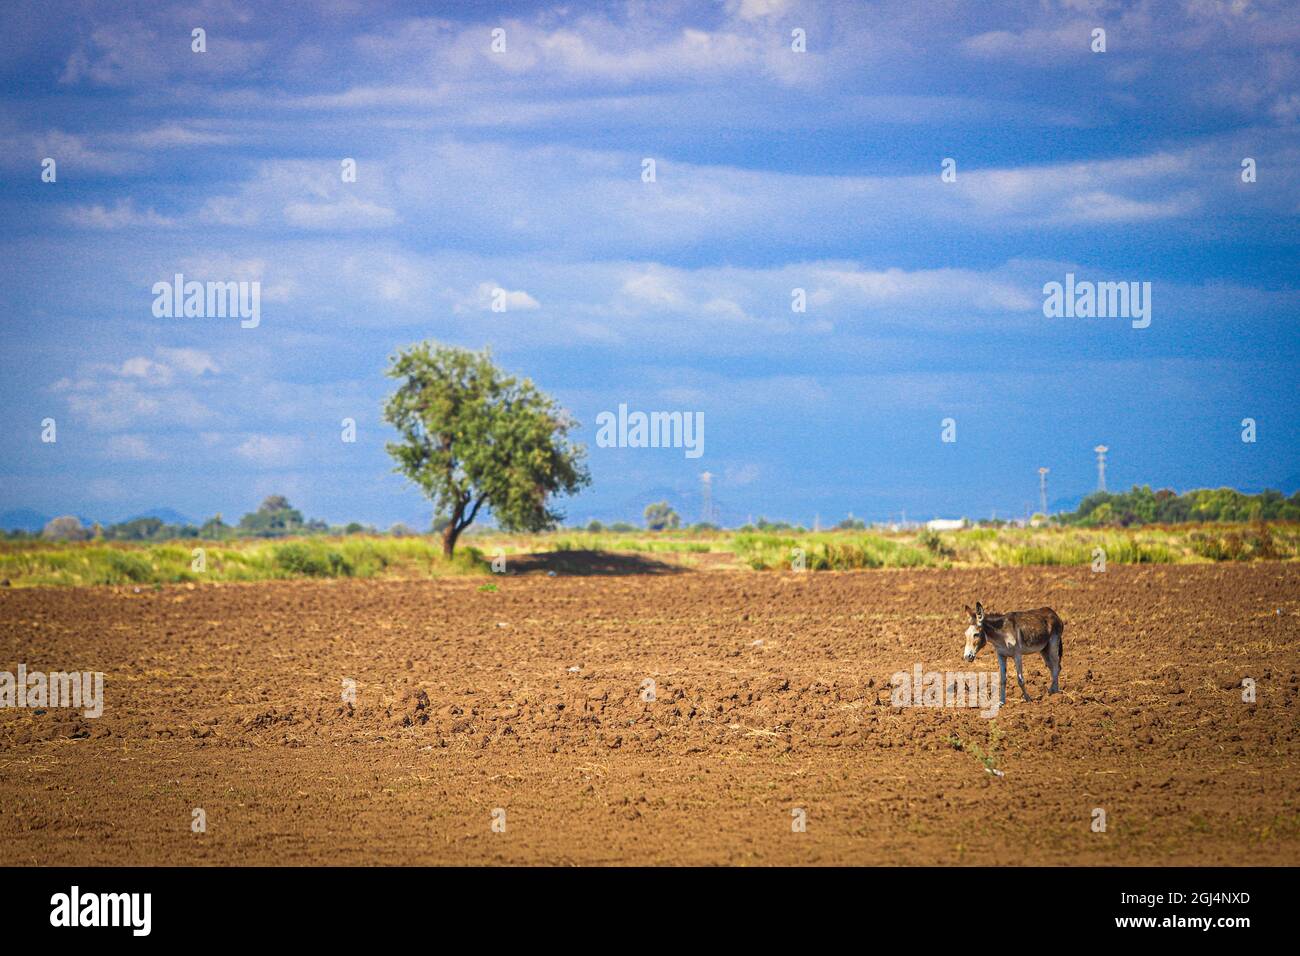 A donkey among the land field landscape for agriculture in Navovaxia, Huatabampo, Mexico. Community or town in the Mexican state of Sonora .... Photo by Luis Gutierrez / NortePhoto.com)   Un burro entre el paisaje de campo de tierra para la agricultura en Navovaxia, Huatabampo, Mexico. Comunidad o pueblo en el estado mexicano de Sonora.... Photo by Luis Gutierrez / NortePhoto.com) Stock Photo